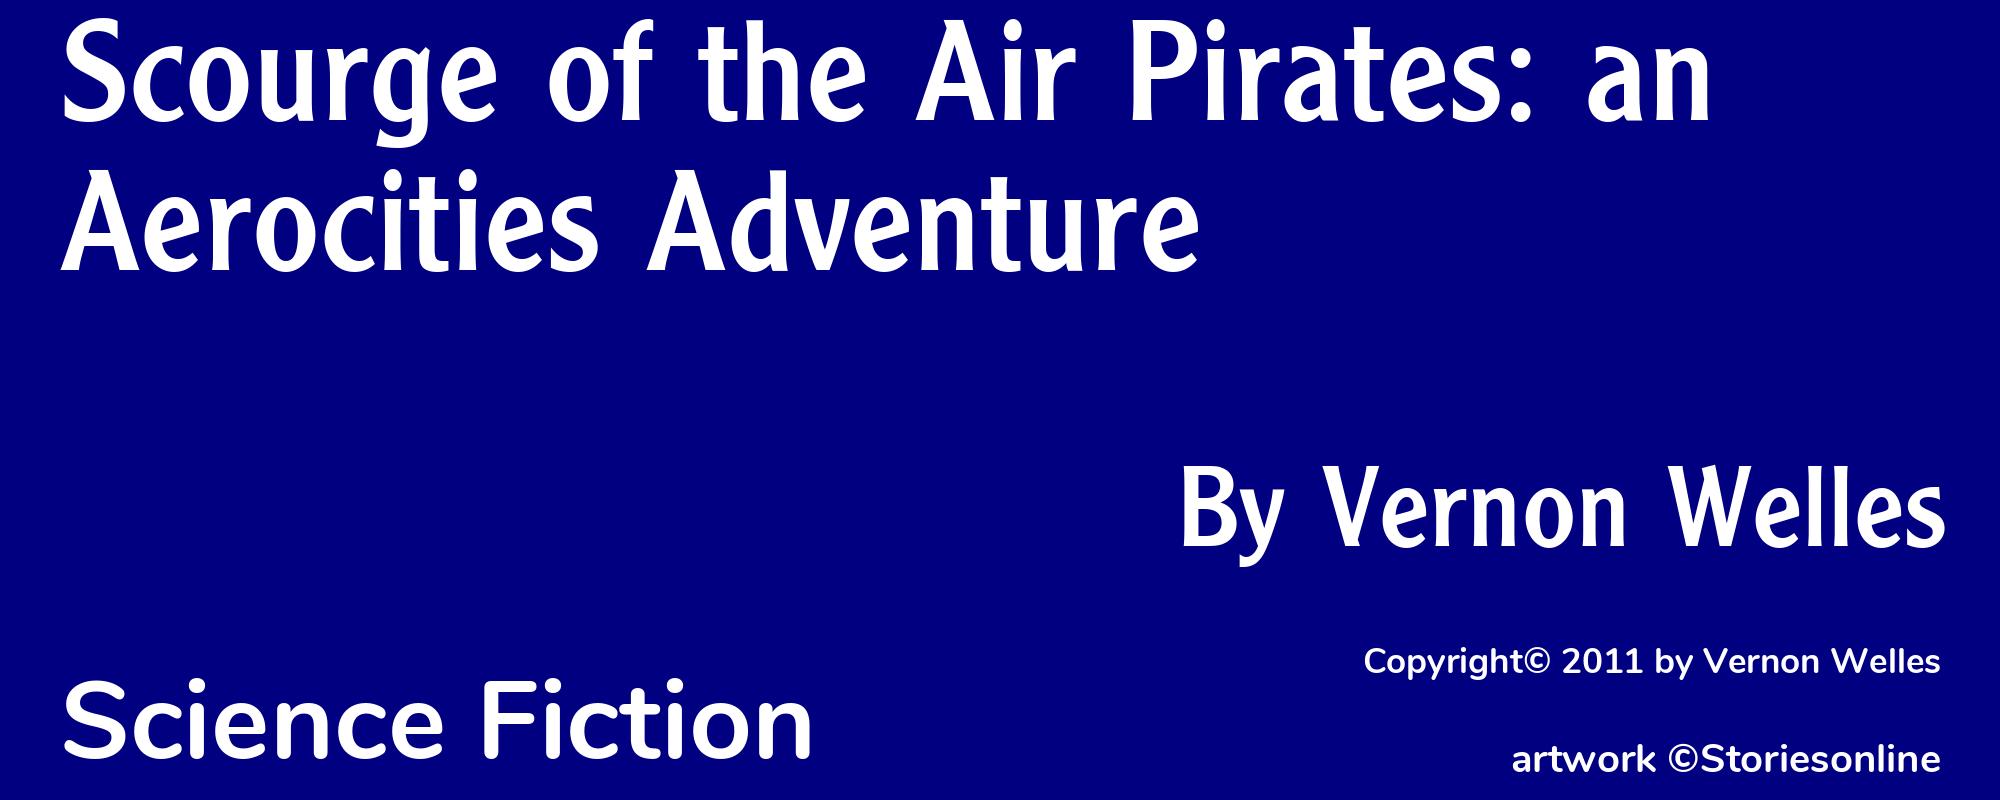 Scourge of the Air Pirates: an Aerocities Adventure - Cover